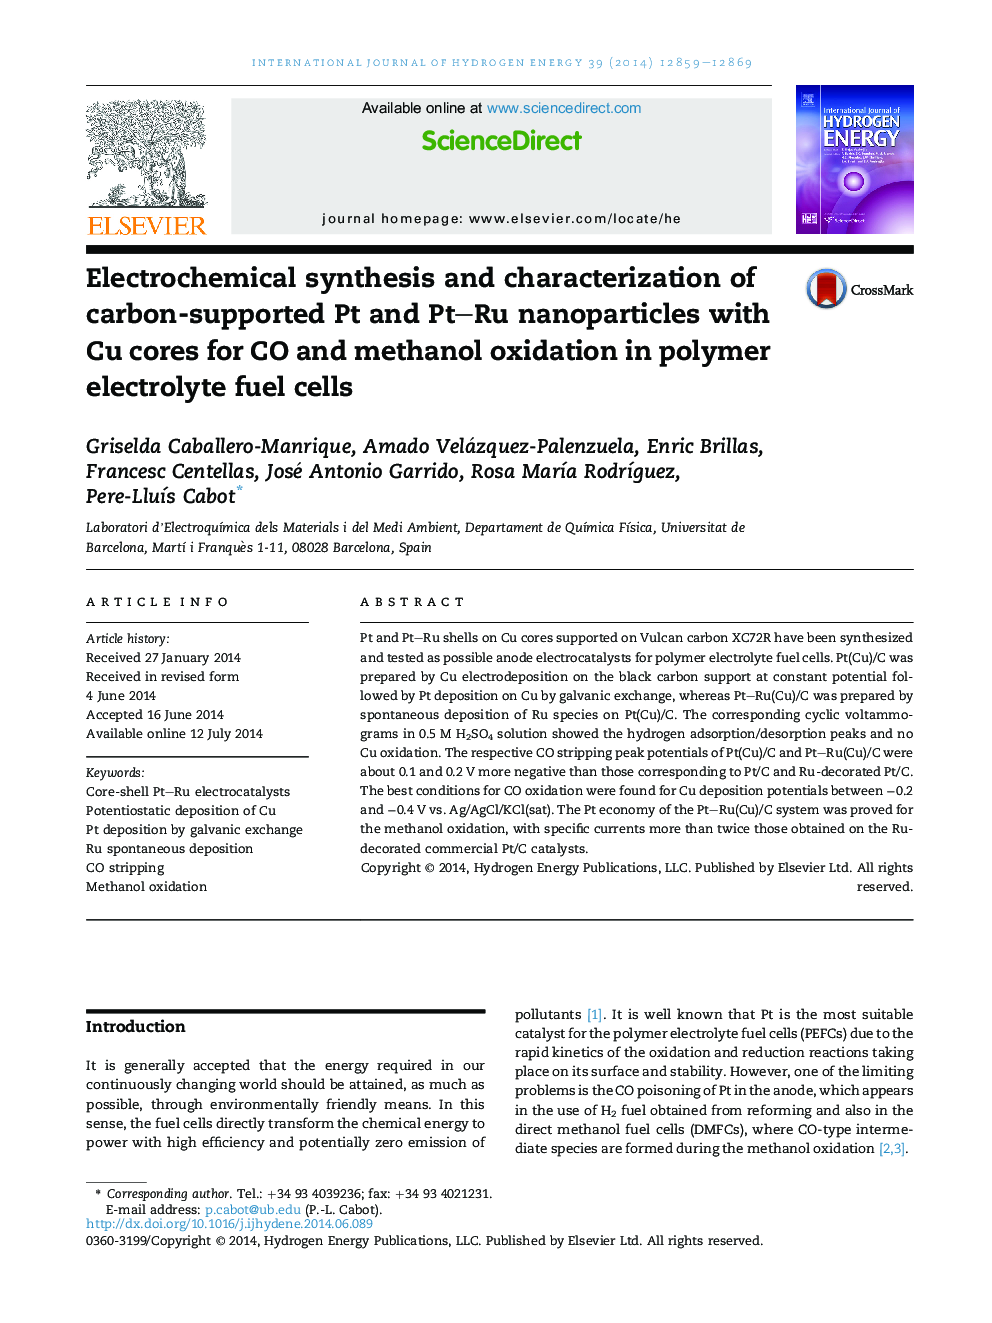 Electrochemical synthesis and characterization of carbon-supported Pt and Pt-Ru nanoparticles with Cu cores for CO and methanol oxidation in polymer electrolyte fuel cells